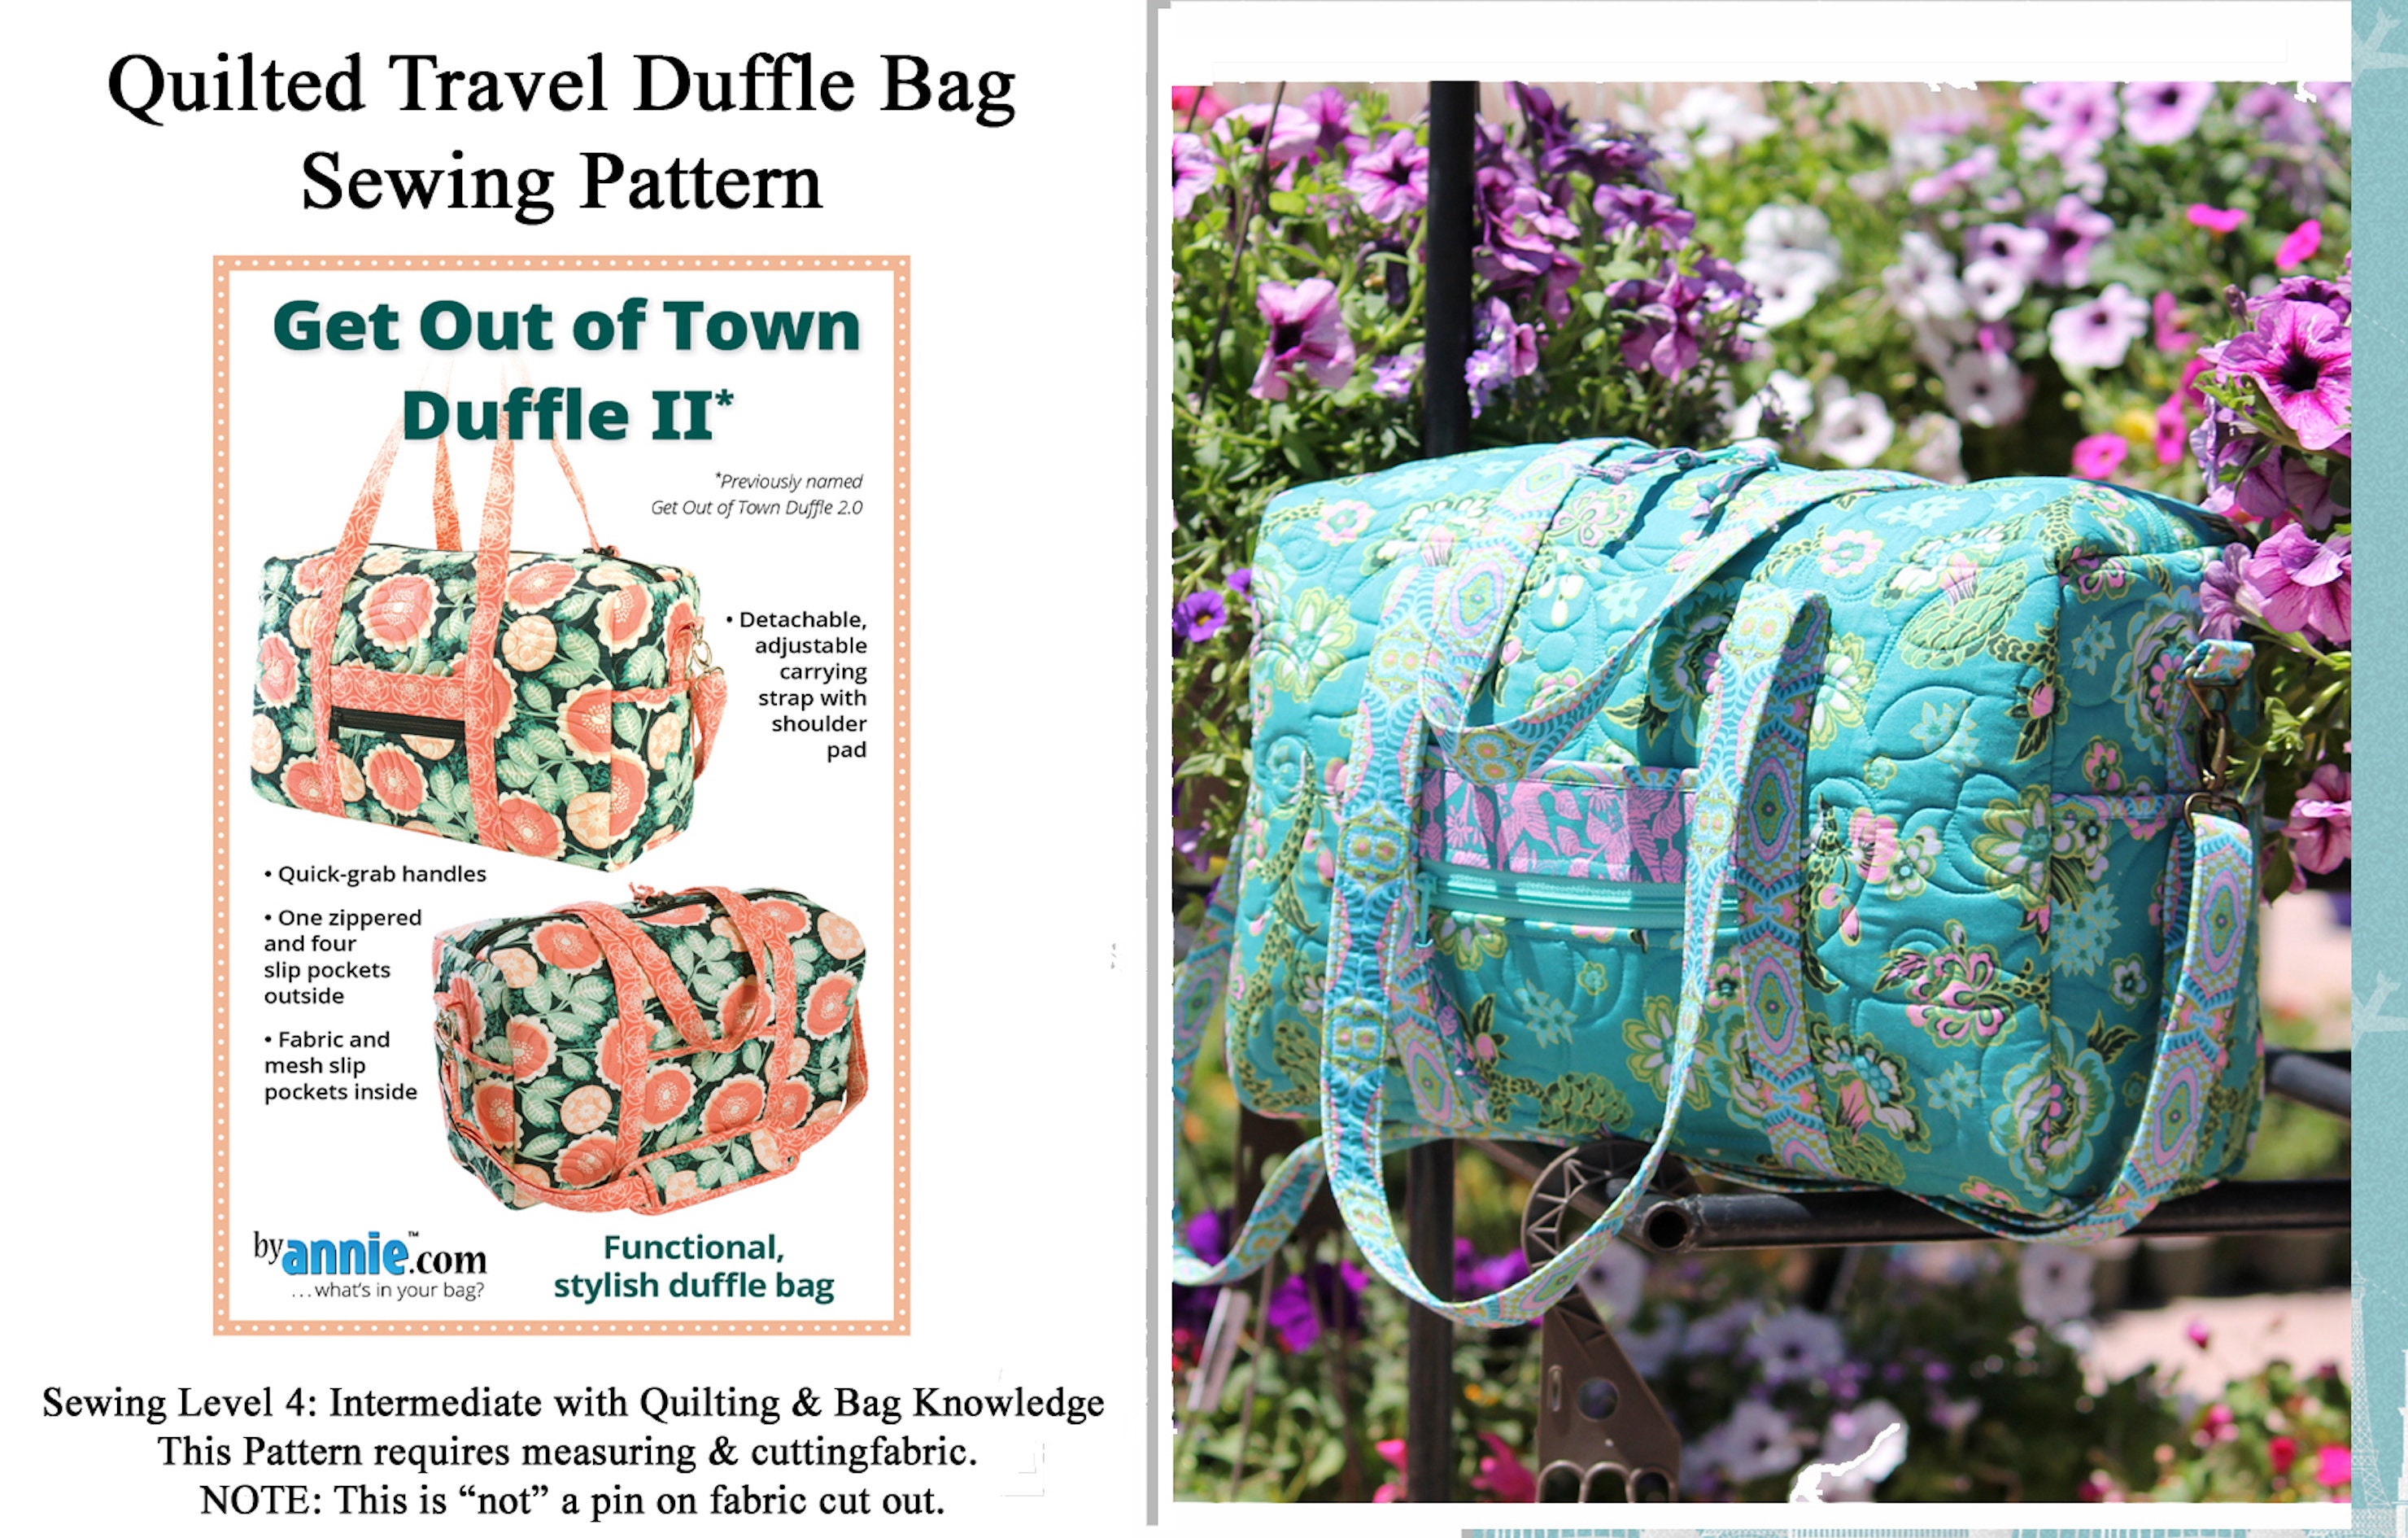 ByAnnie.com Quilt and Sewing Patterns